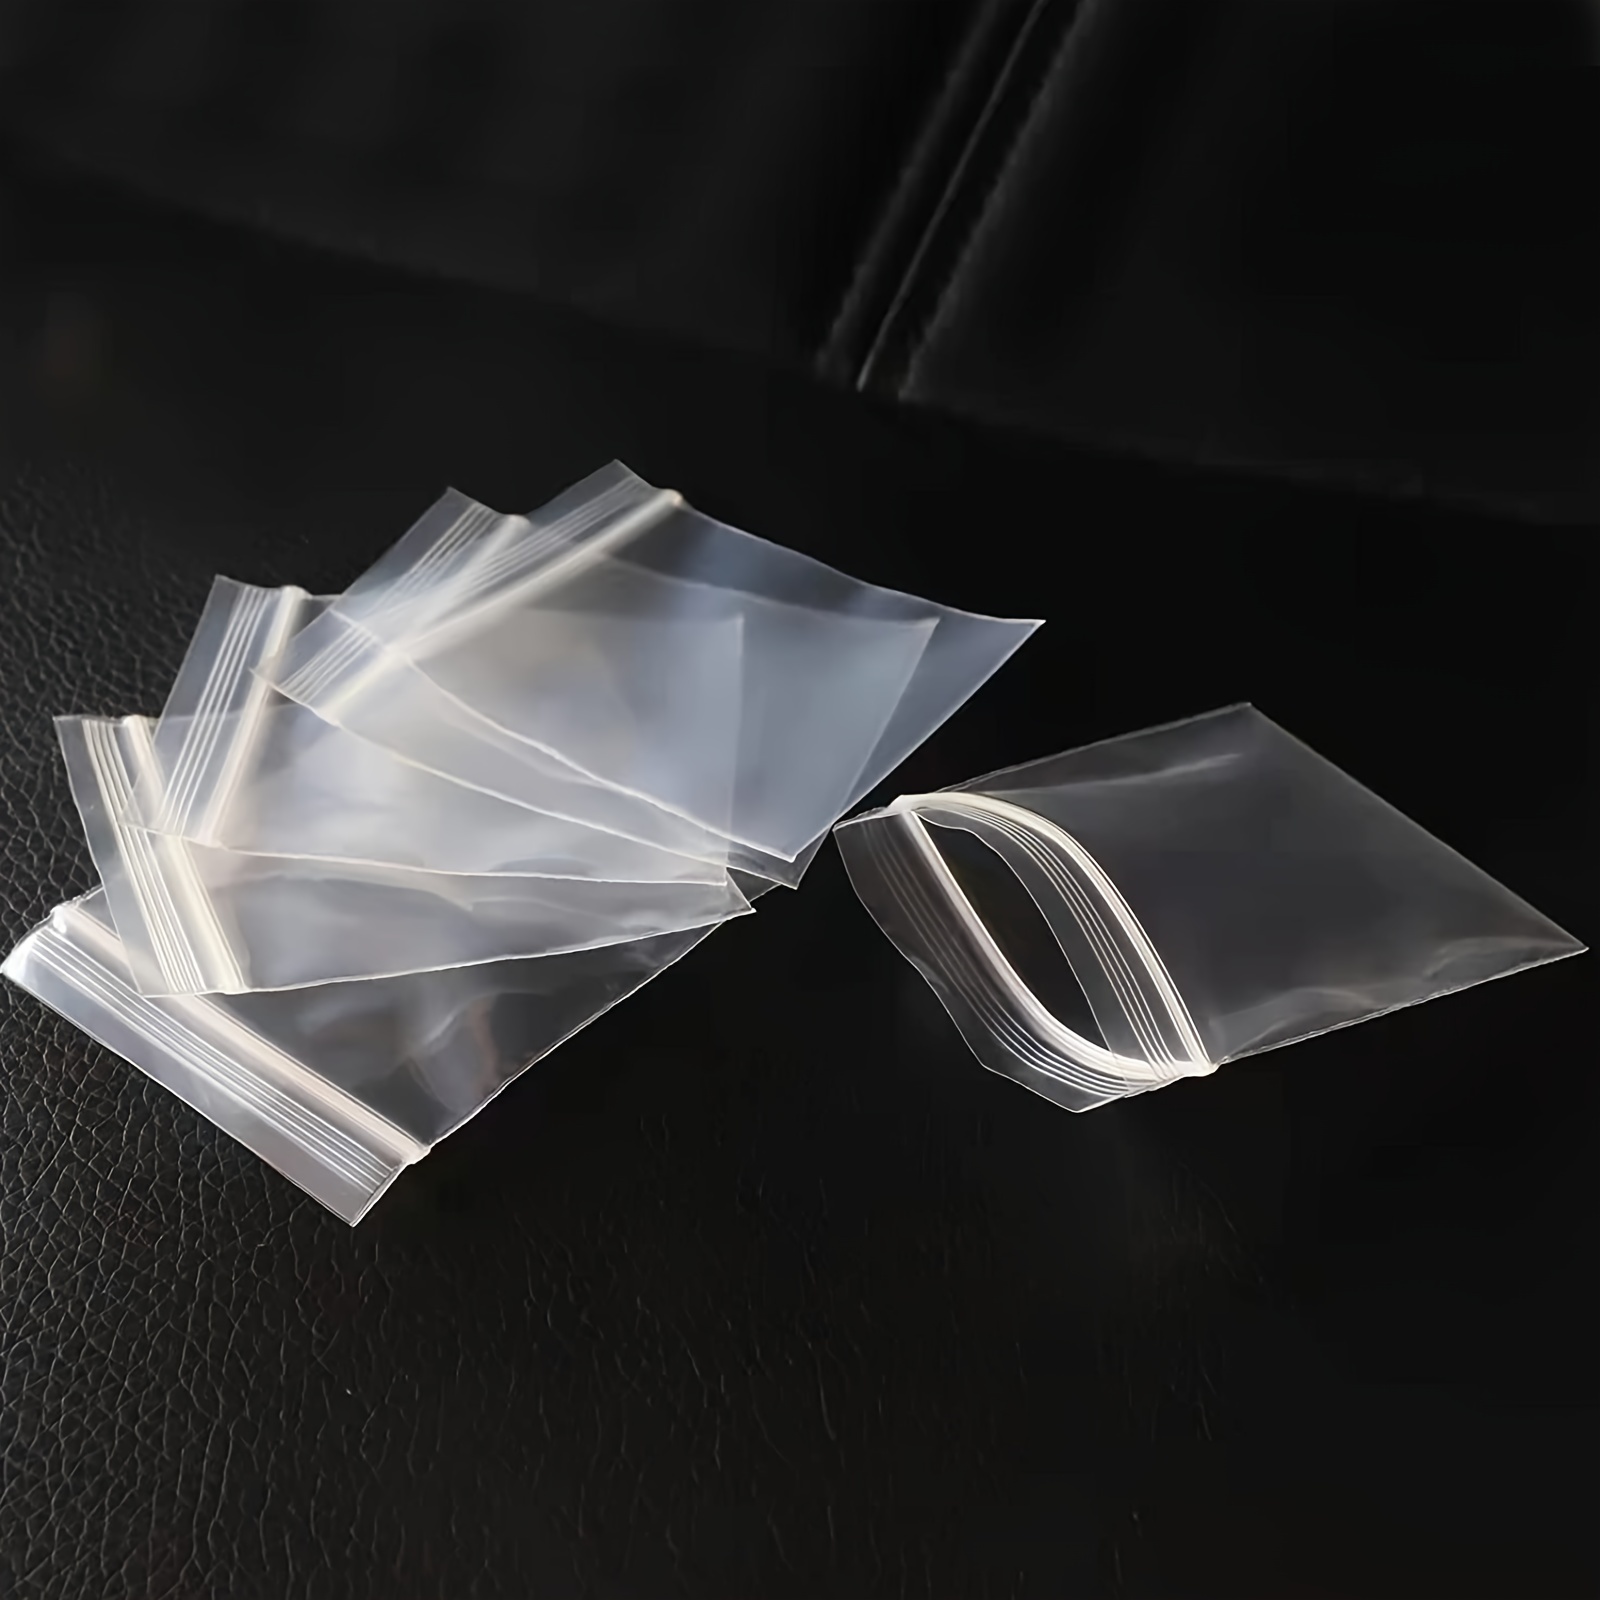 100pcs Transparent Small Ziplock Plastic Bags Jewelry Gift Reclosable  Storage Bag Packaging Clear PVC Self Sealing Pouches - AliExpress